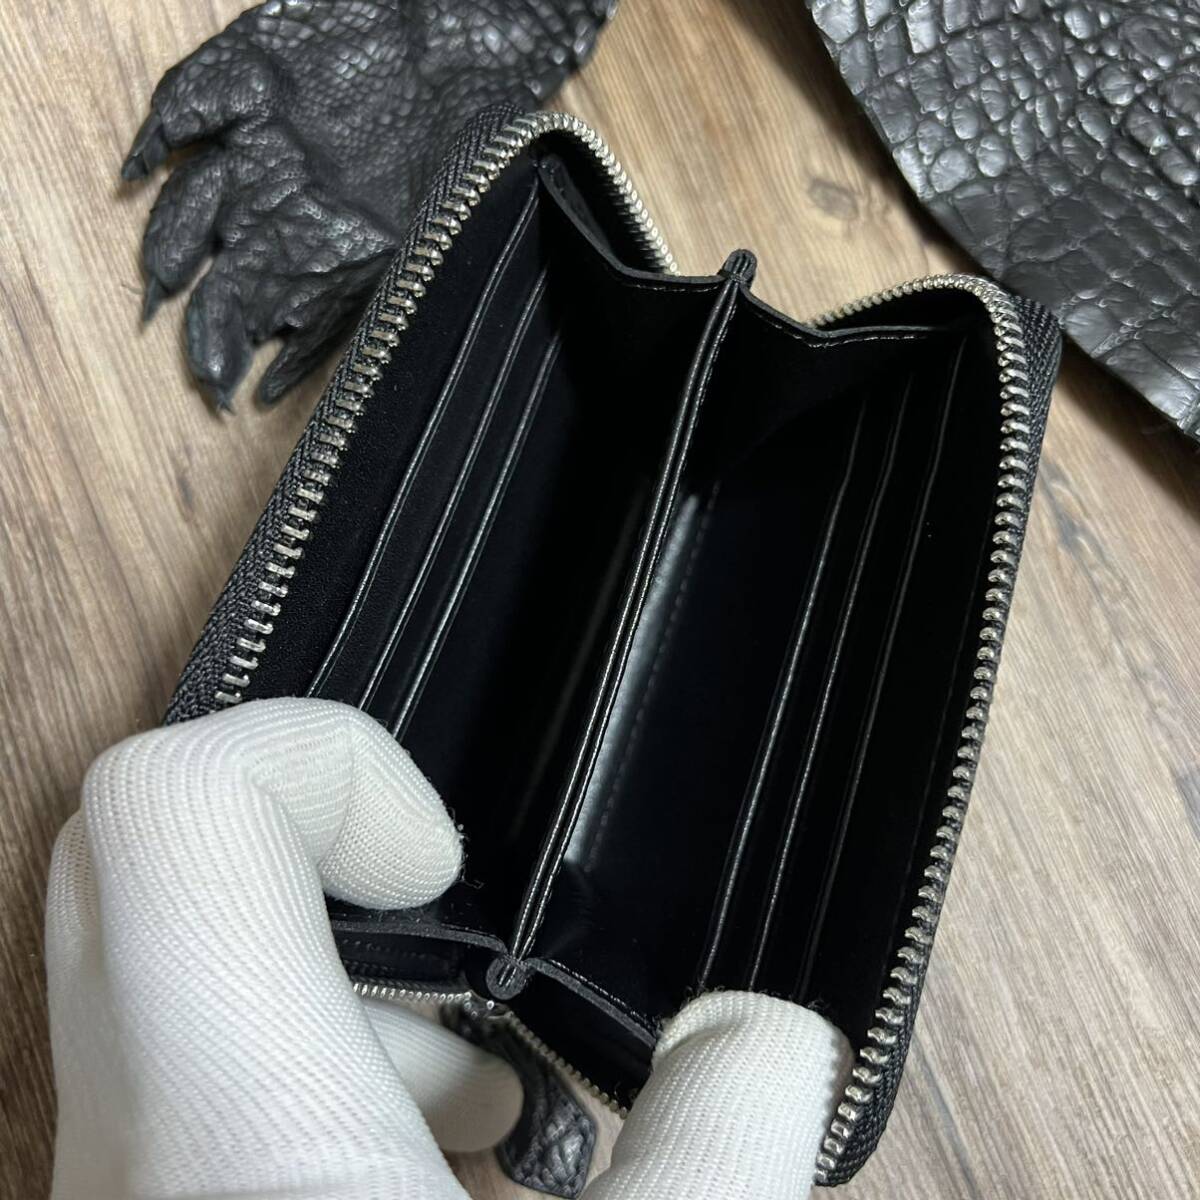 [ the truth thing photographing ] black black crocodile men's round fastener wani. original leather hand dyeing handmade long wallet .. compact Mini purse 